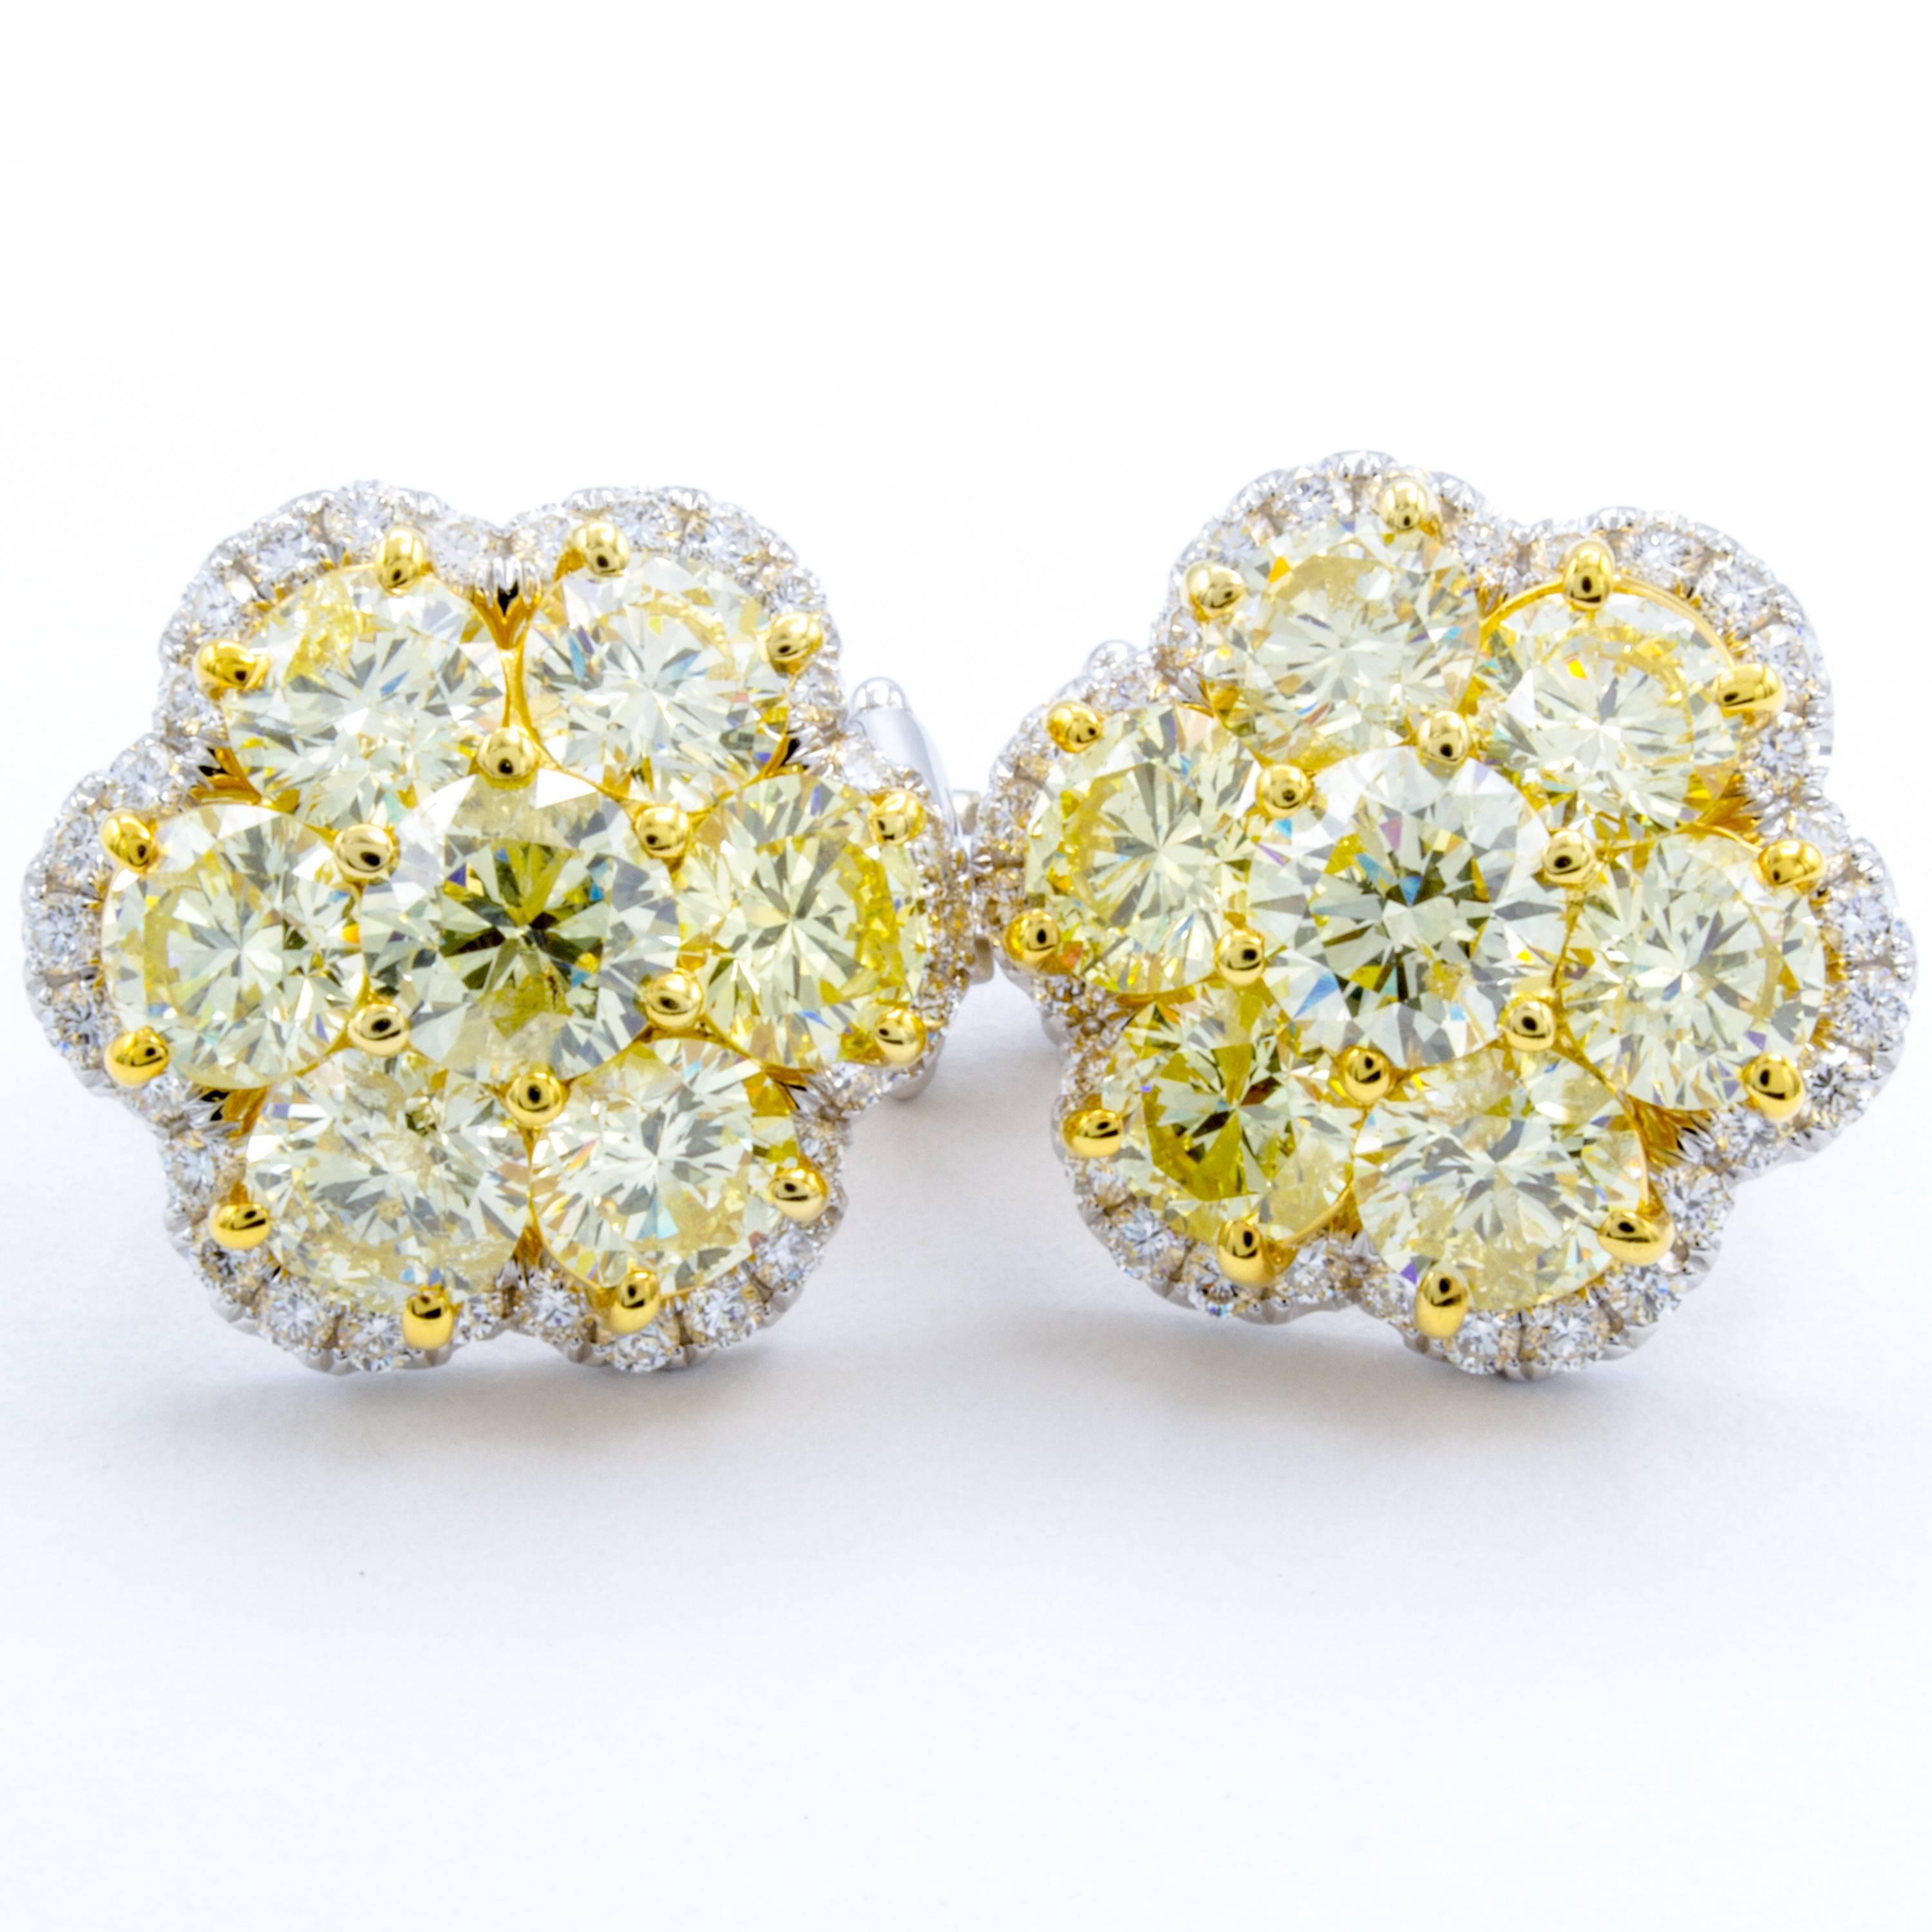 A brightly light bouquet of round brilliant diamonds show their rare natural fancy yellow color in these gorgeous stud earrings from Rosenberg Diamonds & Co. A total of 4.33 carats shine within these fancy yellow diamonds, 7 in each earring, all